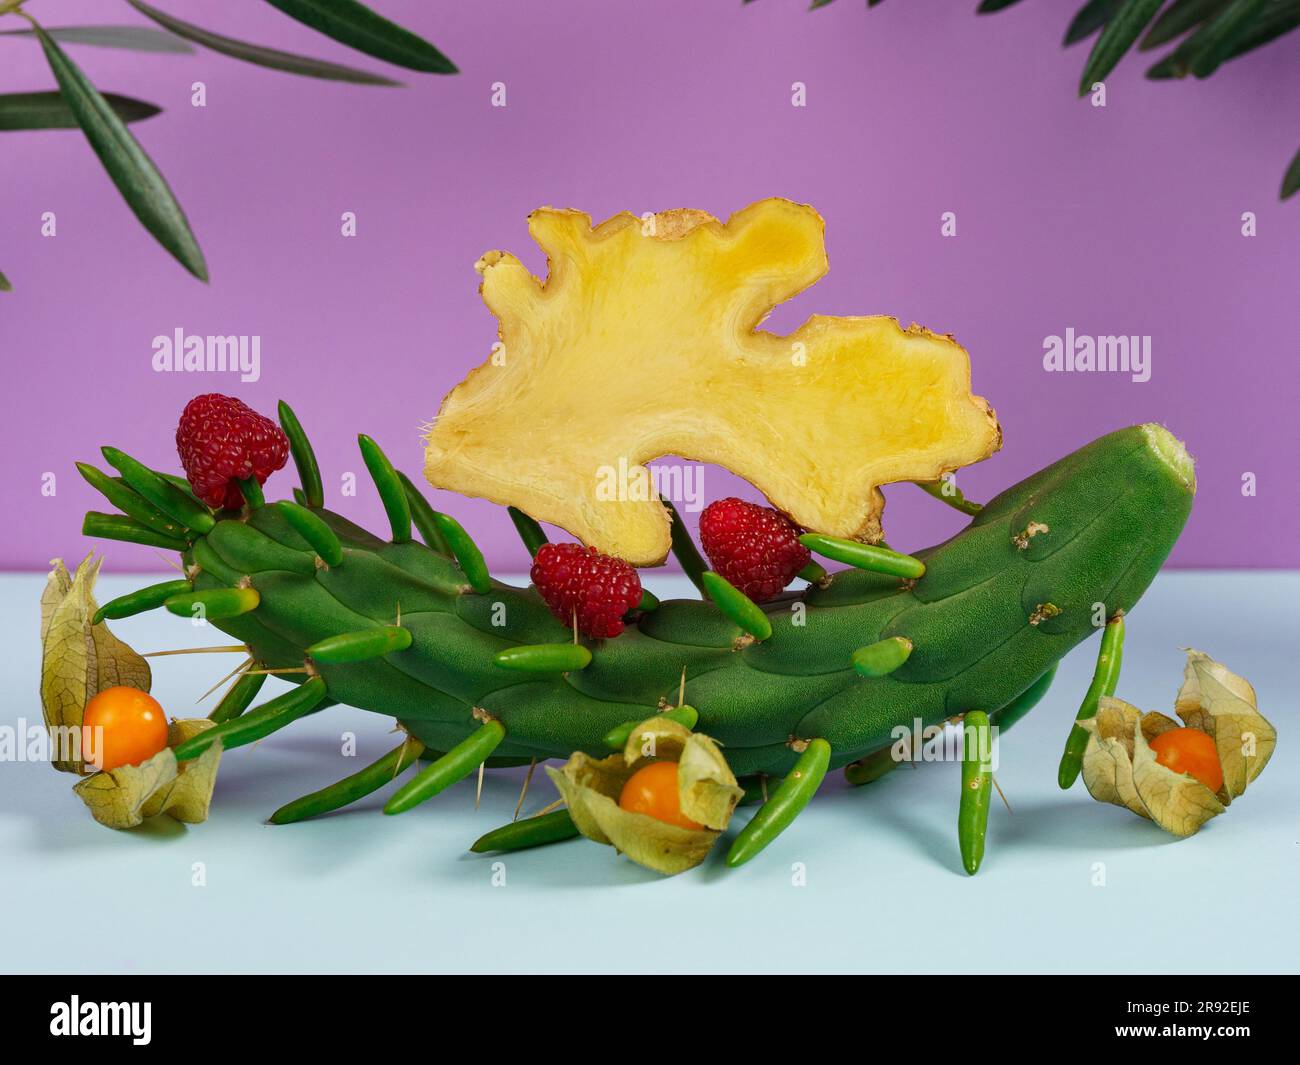 Berry still life with ginger on a cactus prickly pear subulata Stock Photo